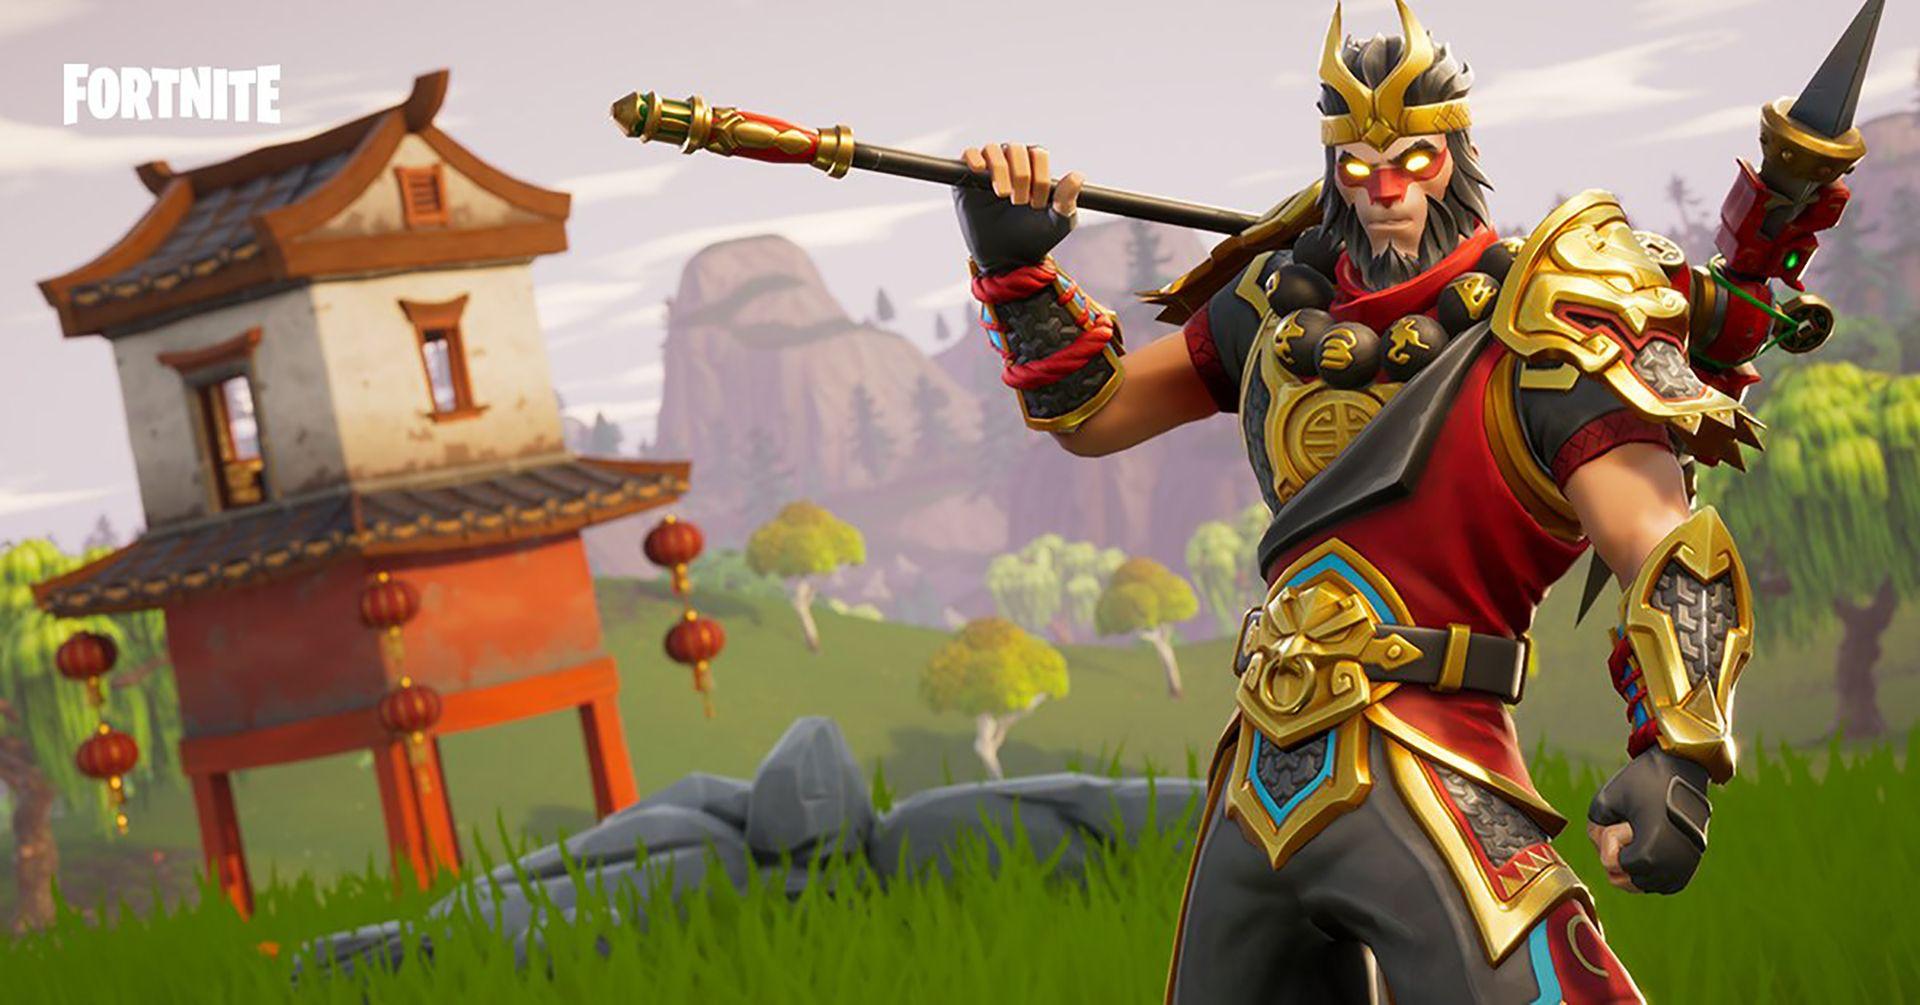 Wukong Fortnite Outfit Skin How to Get + Info